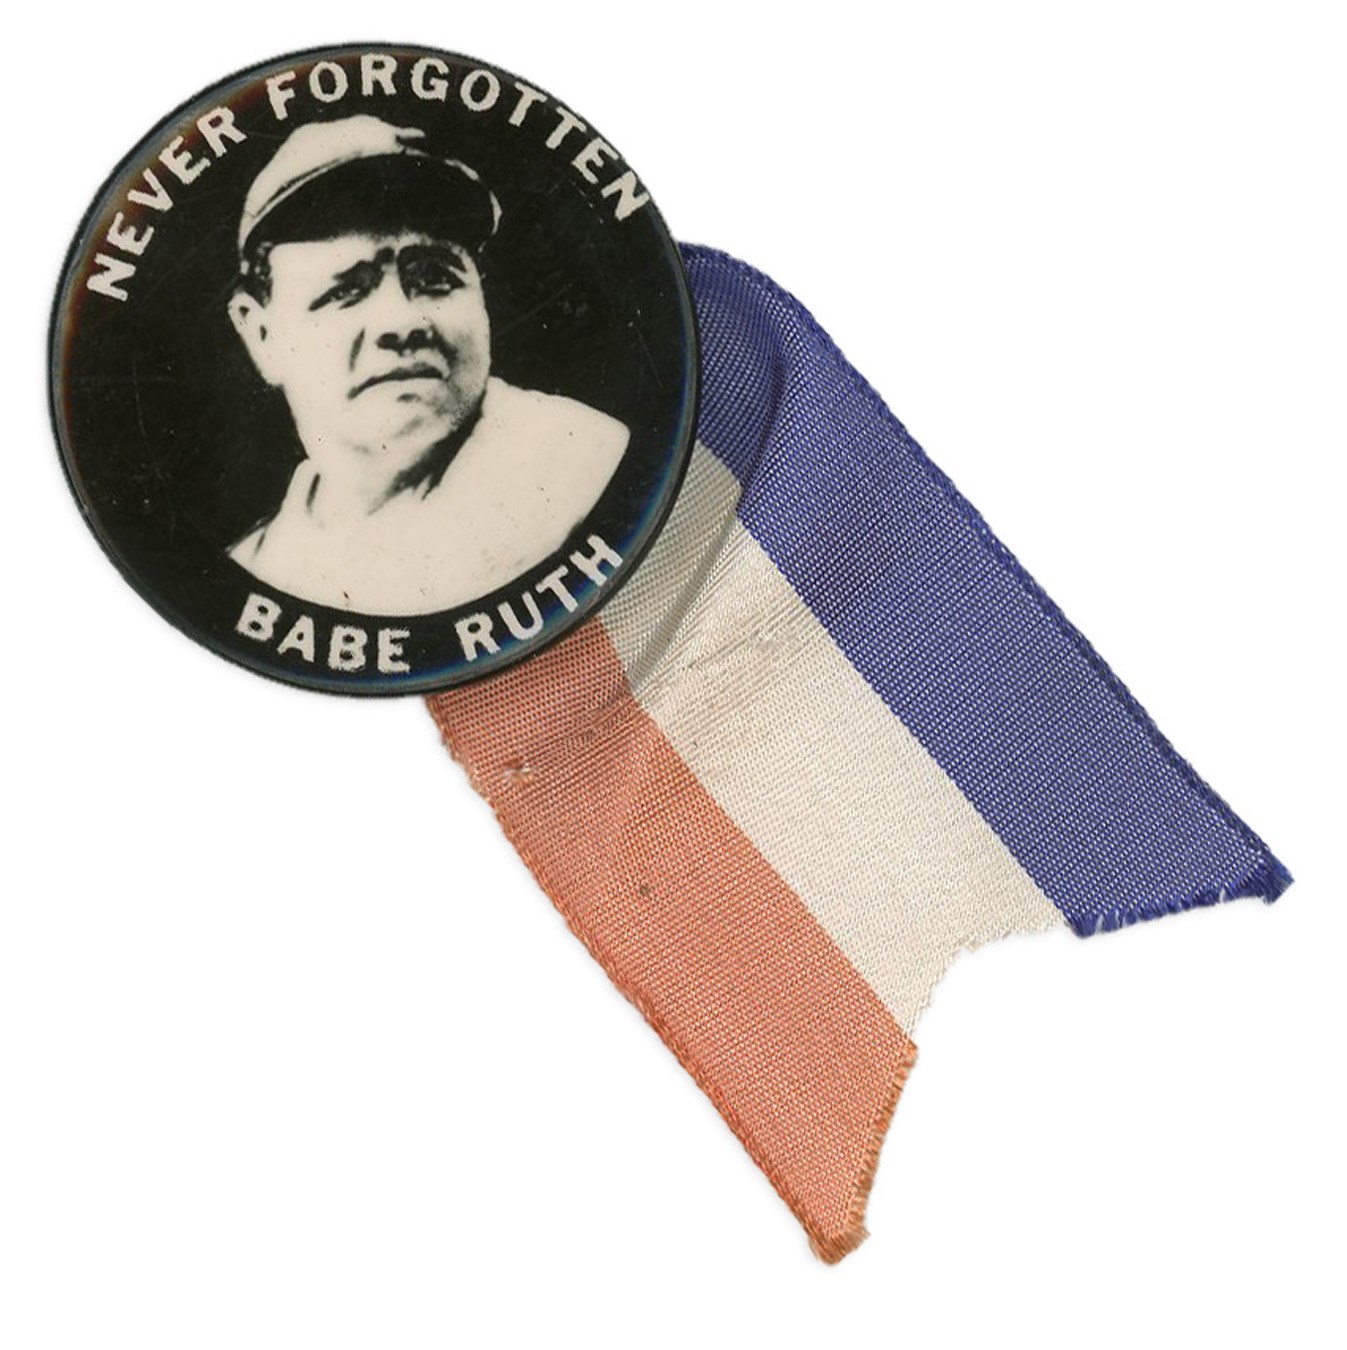 - 1948 Babe Ruth "Never Forgotten" PM10 Pin